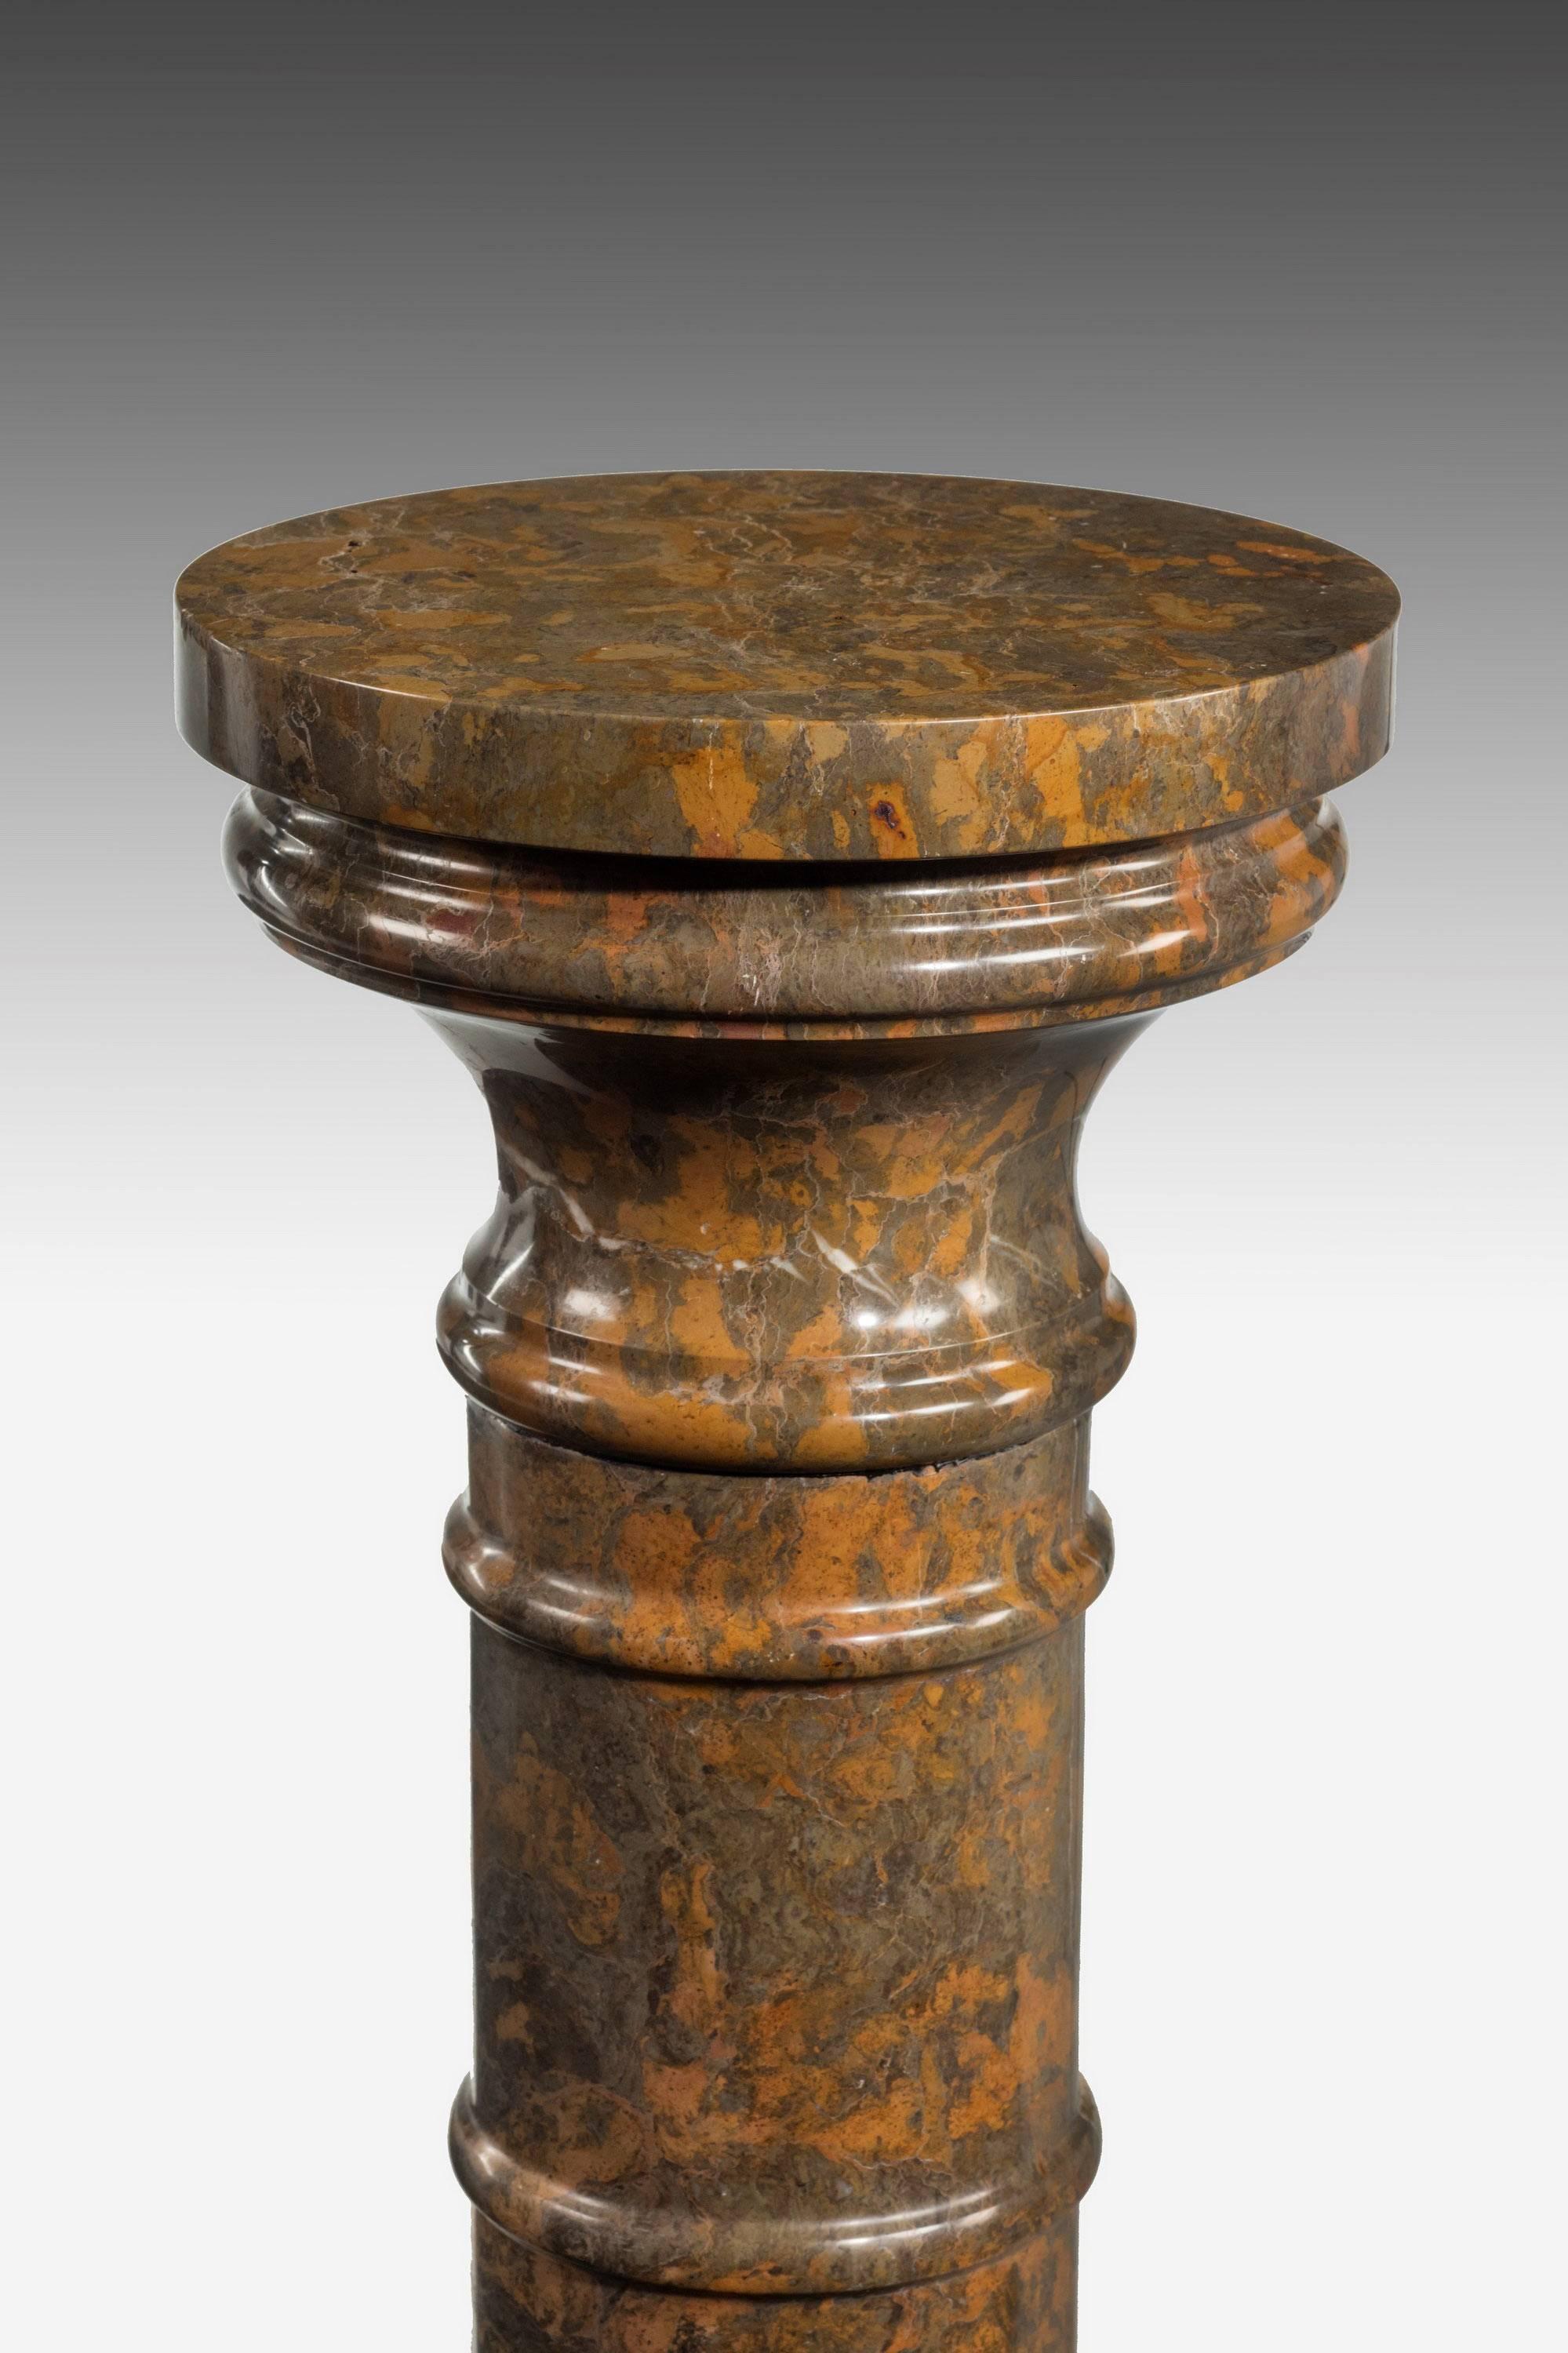 A beautifully figured late 19th century Italian marble pedestal with ring turned decoration to the centre. Excellent overall condition and good patina.